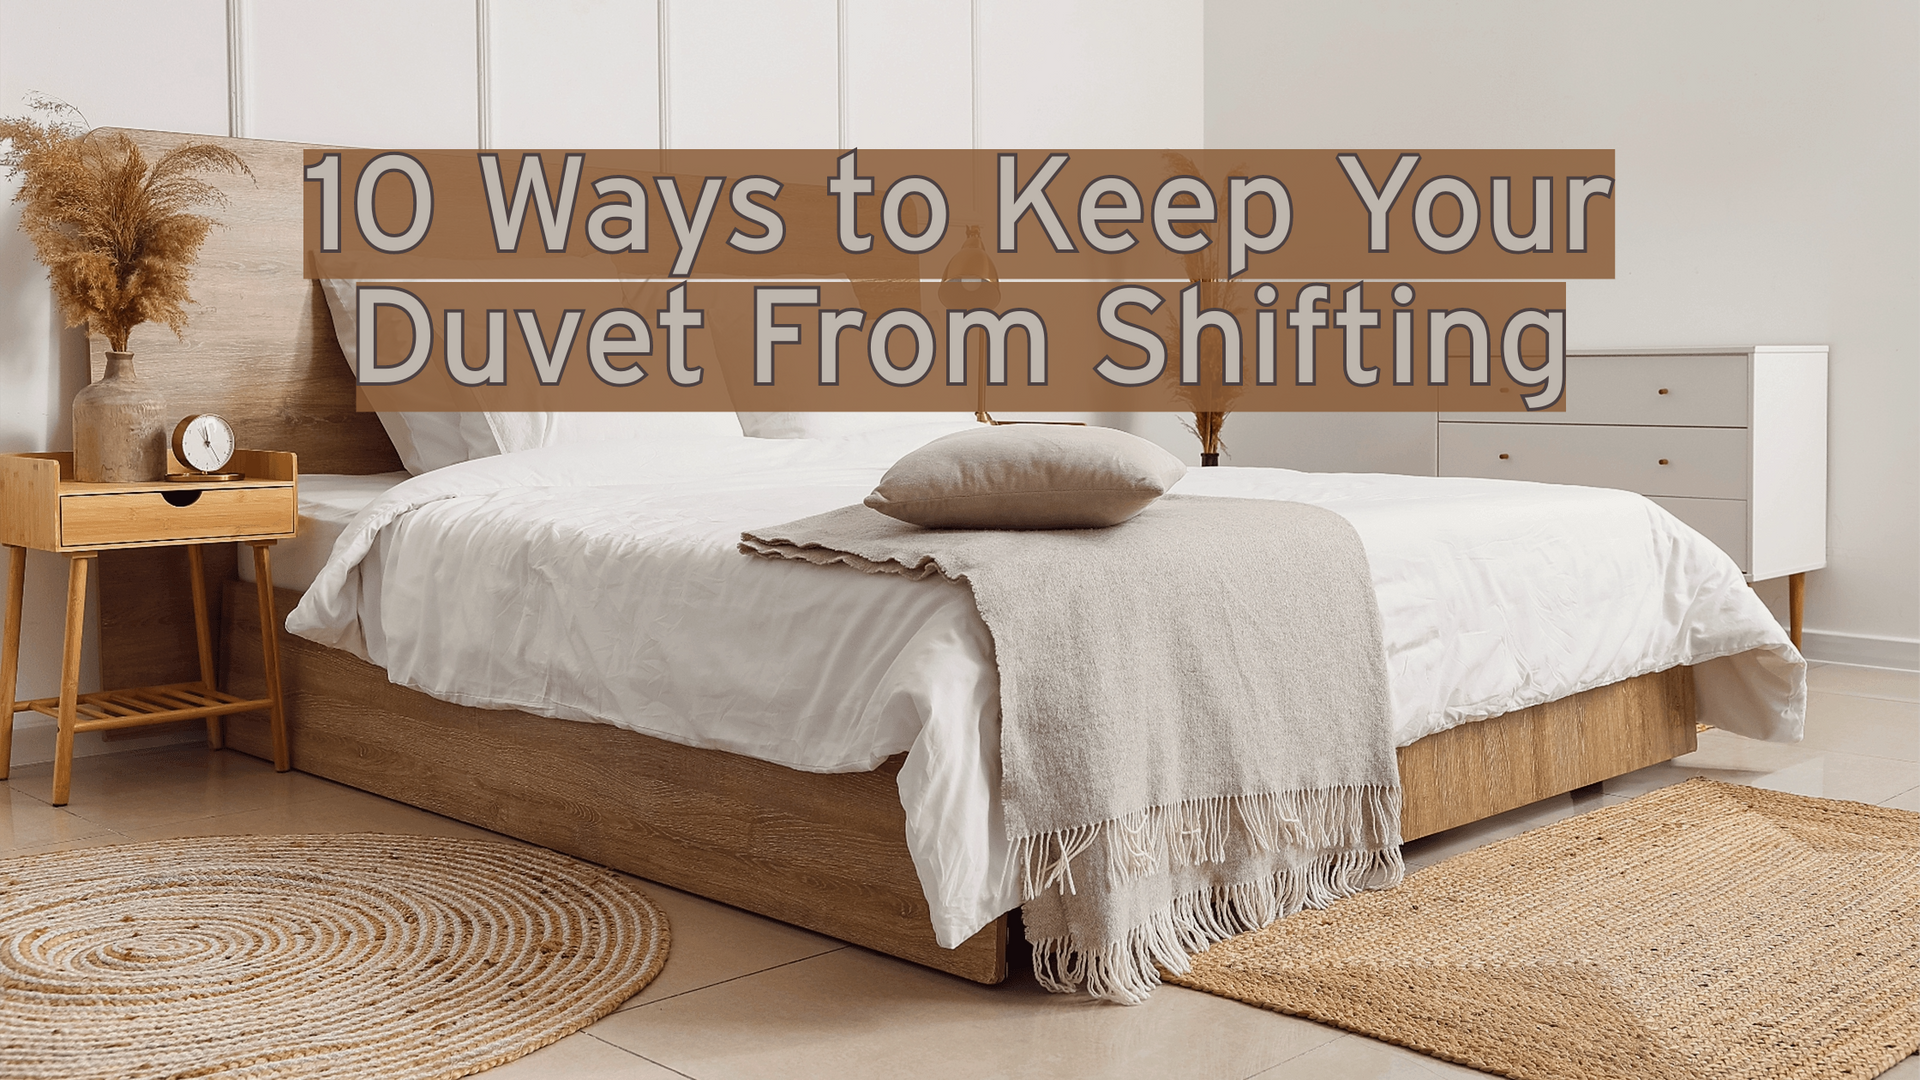 10 Ways to Keep Your Duvet From Shifting – Primpins